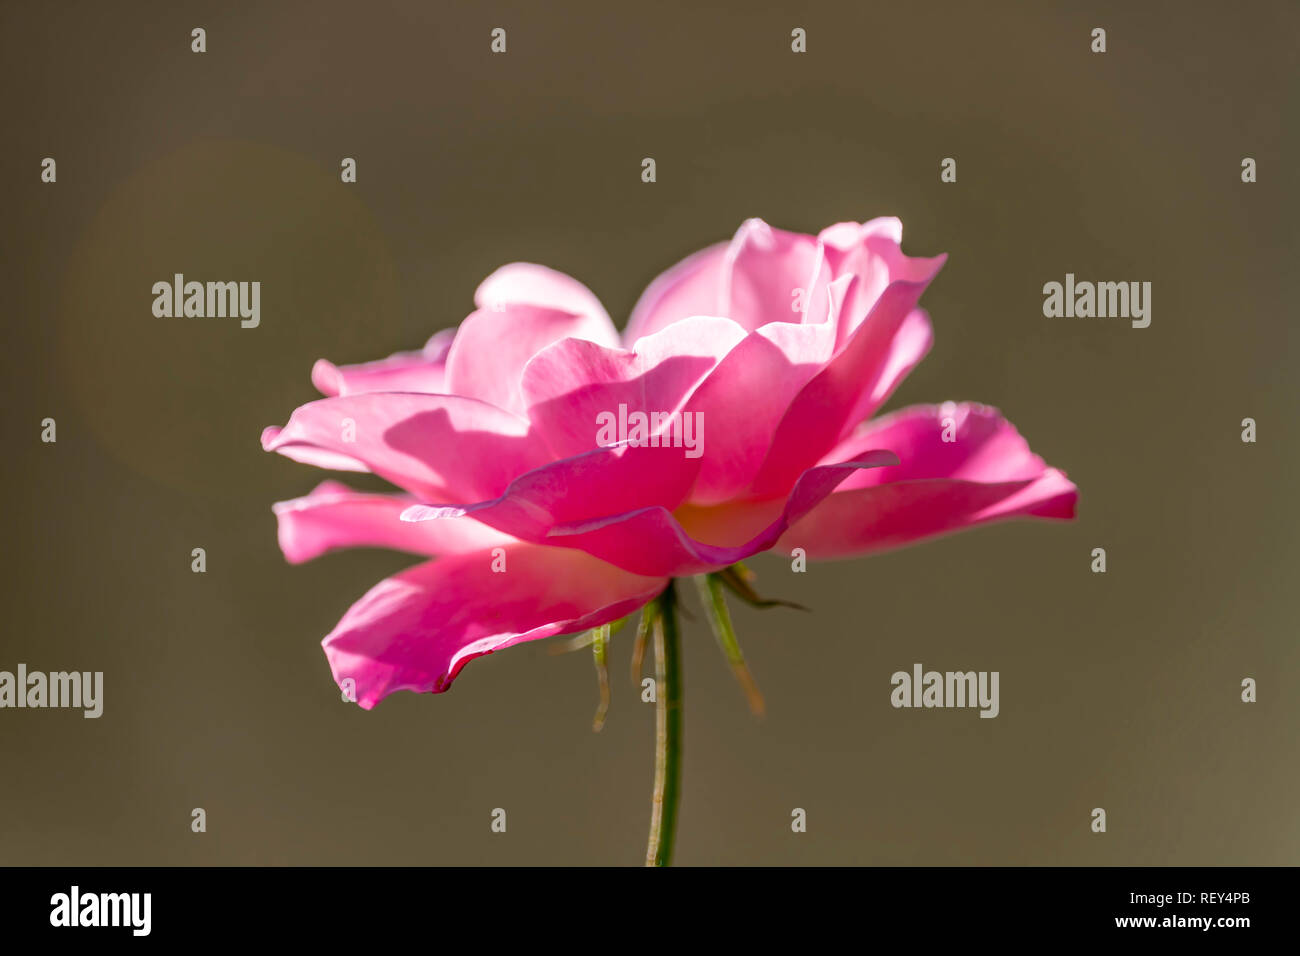 Pink rose flower head on blurred background close up Stock Photo